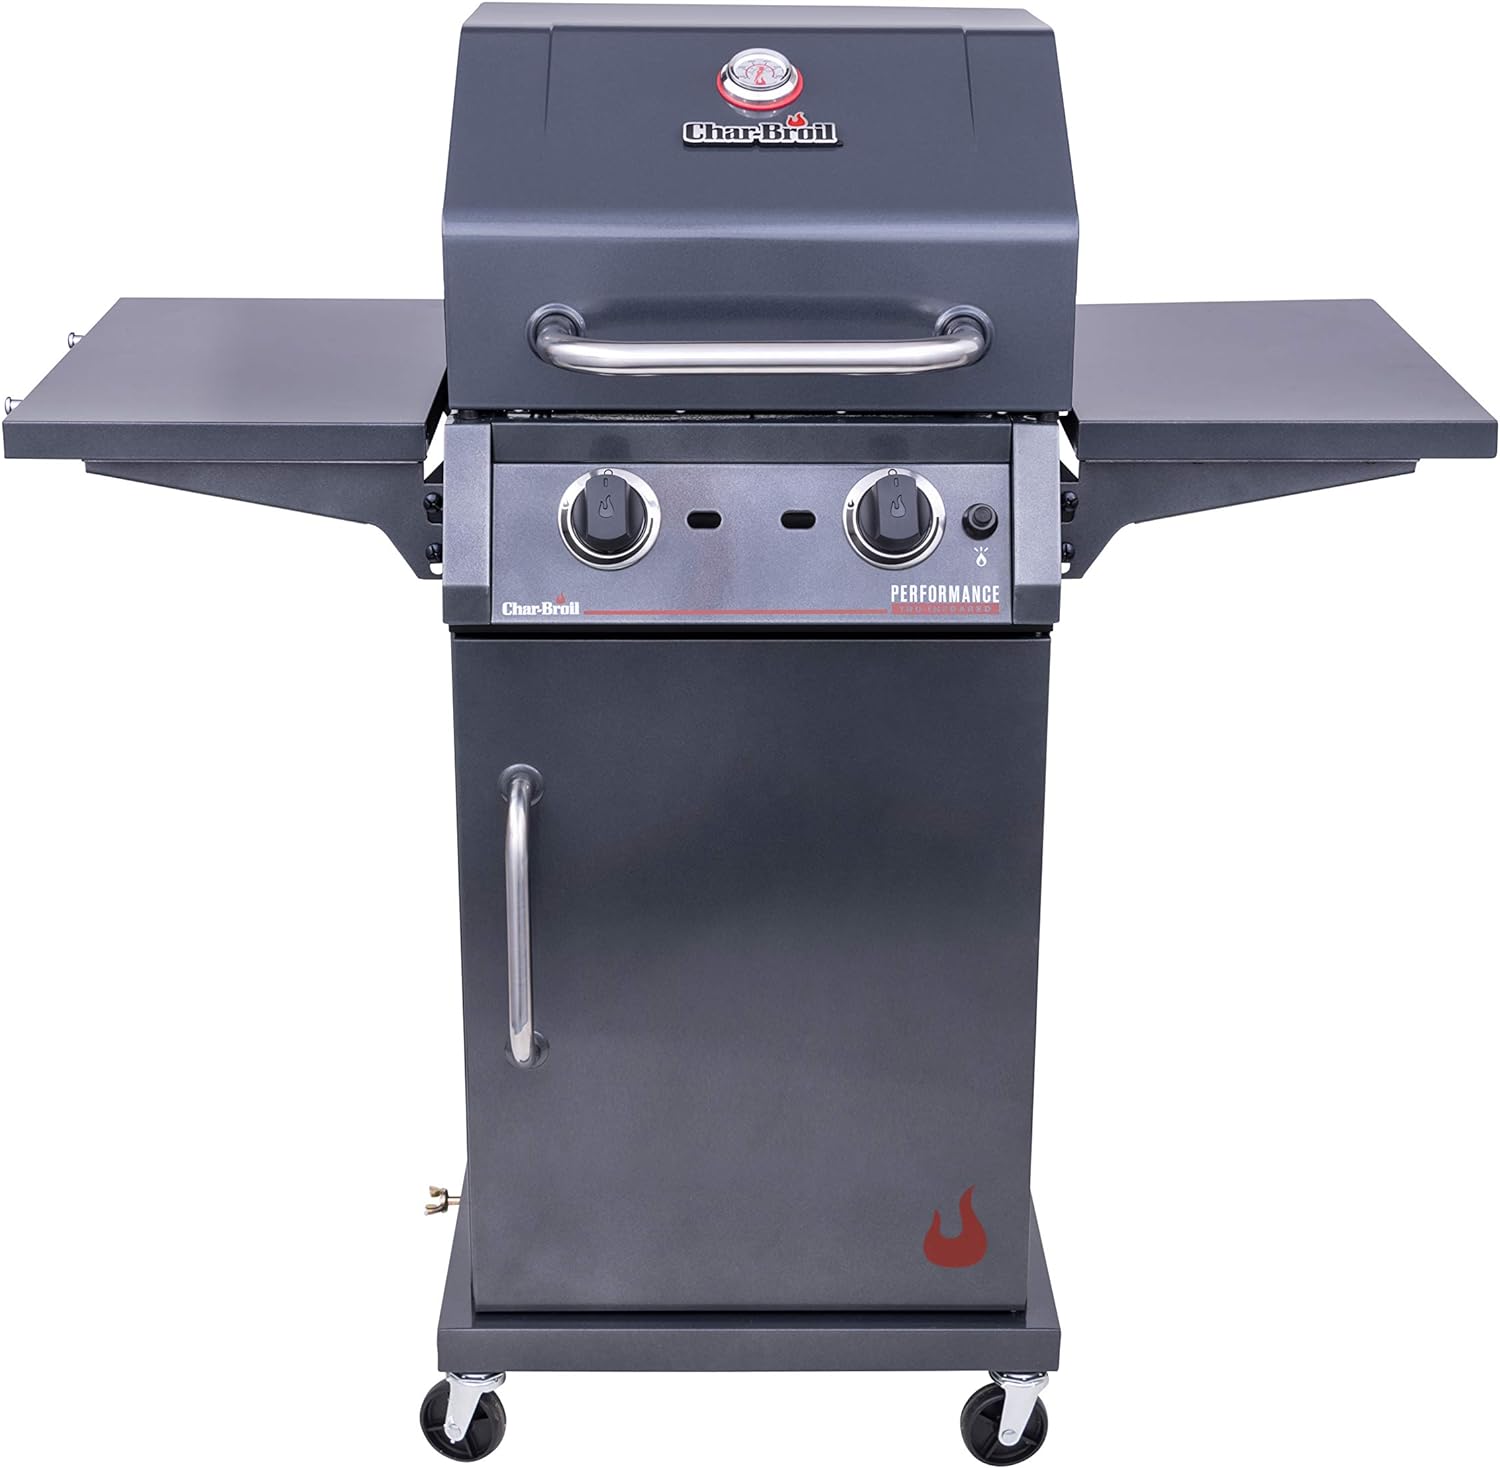 Char-Broil® Performance Series™ Amplifire™ Infrared Cooking Technology 2-Burner Cabinet Propane Gas Stainless Steel Grill - 463655621 - Char-Broil® Performance Series™ Grill Review